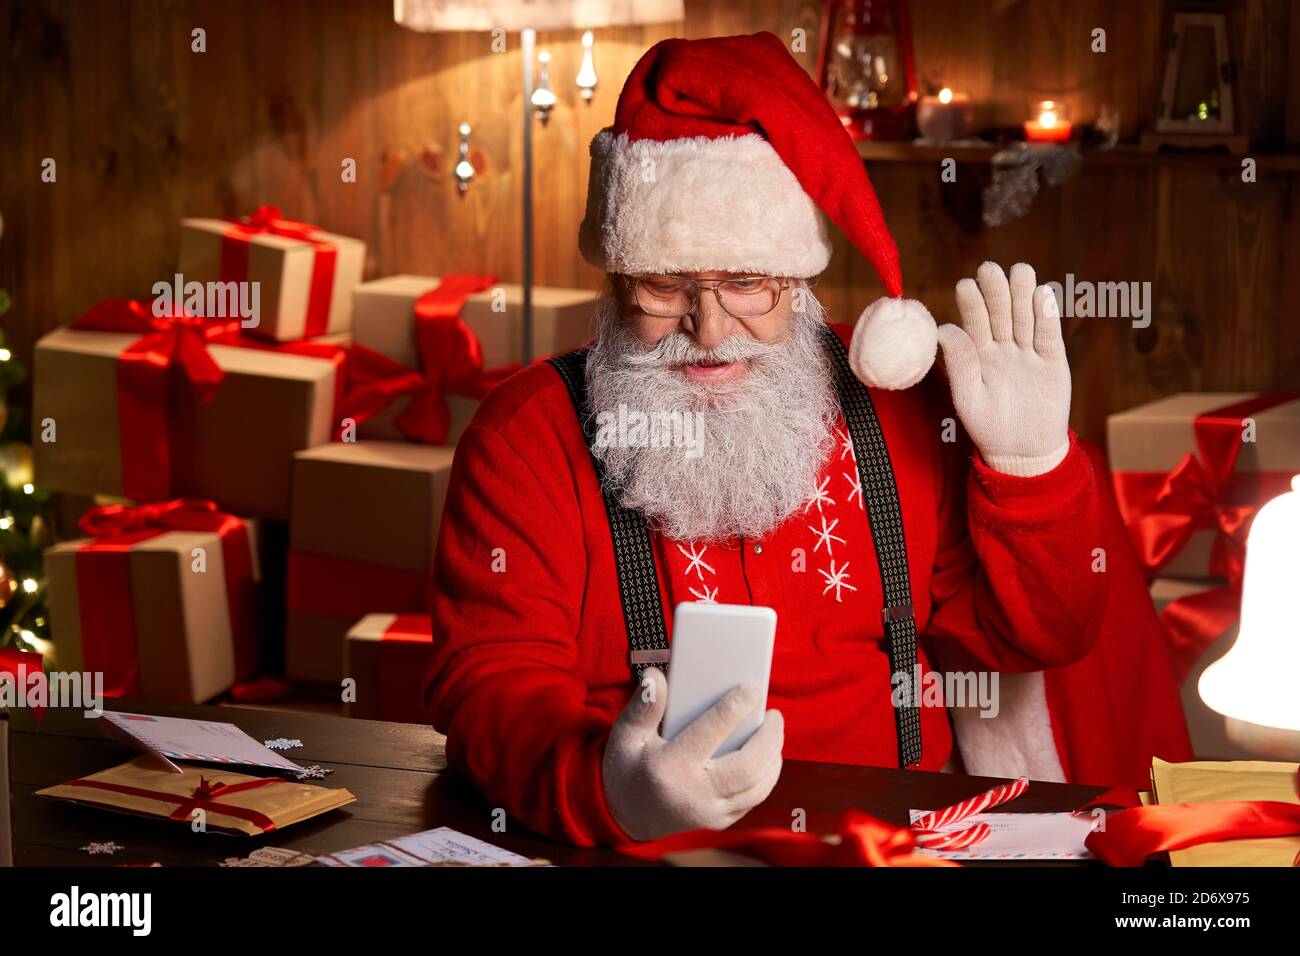 Santa Claus video calling holding smartphone sitting at home table. Stock Photo